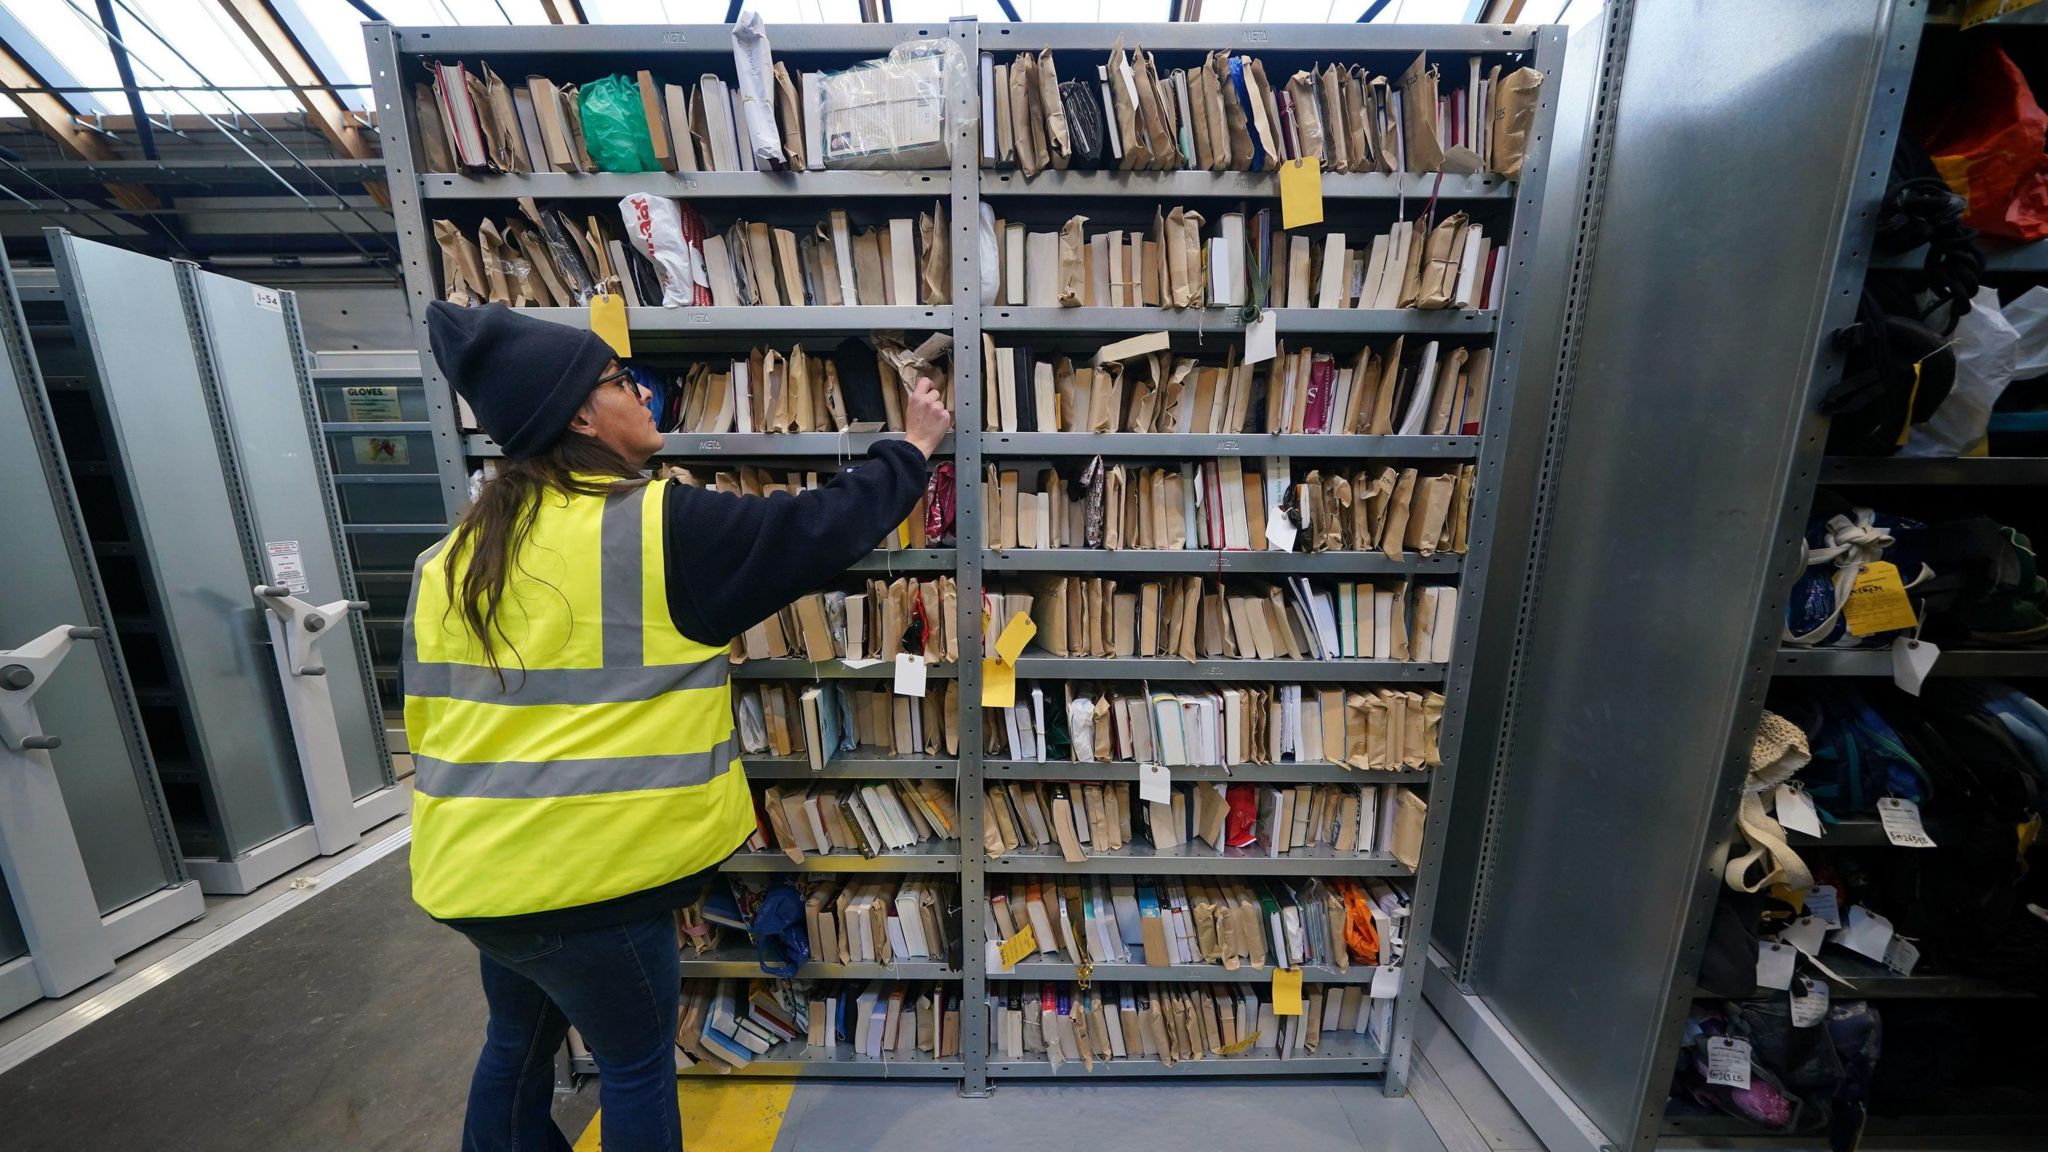 A little library's worth of Tube reads goes amiss 